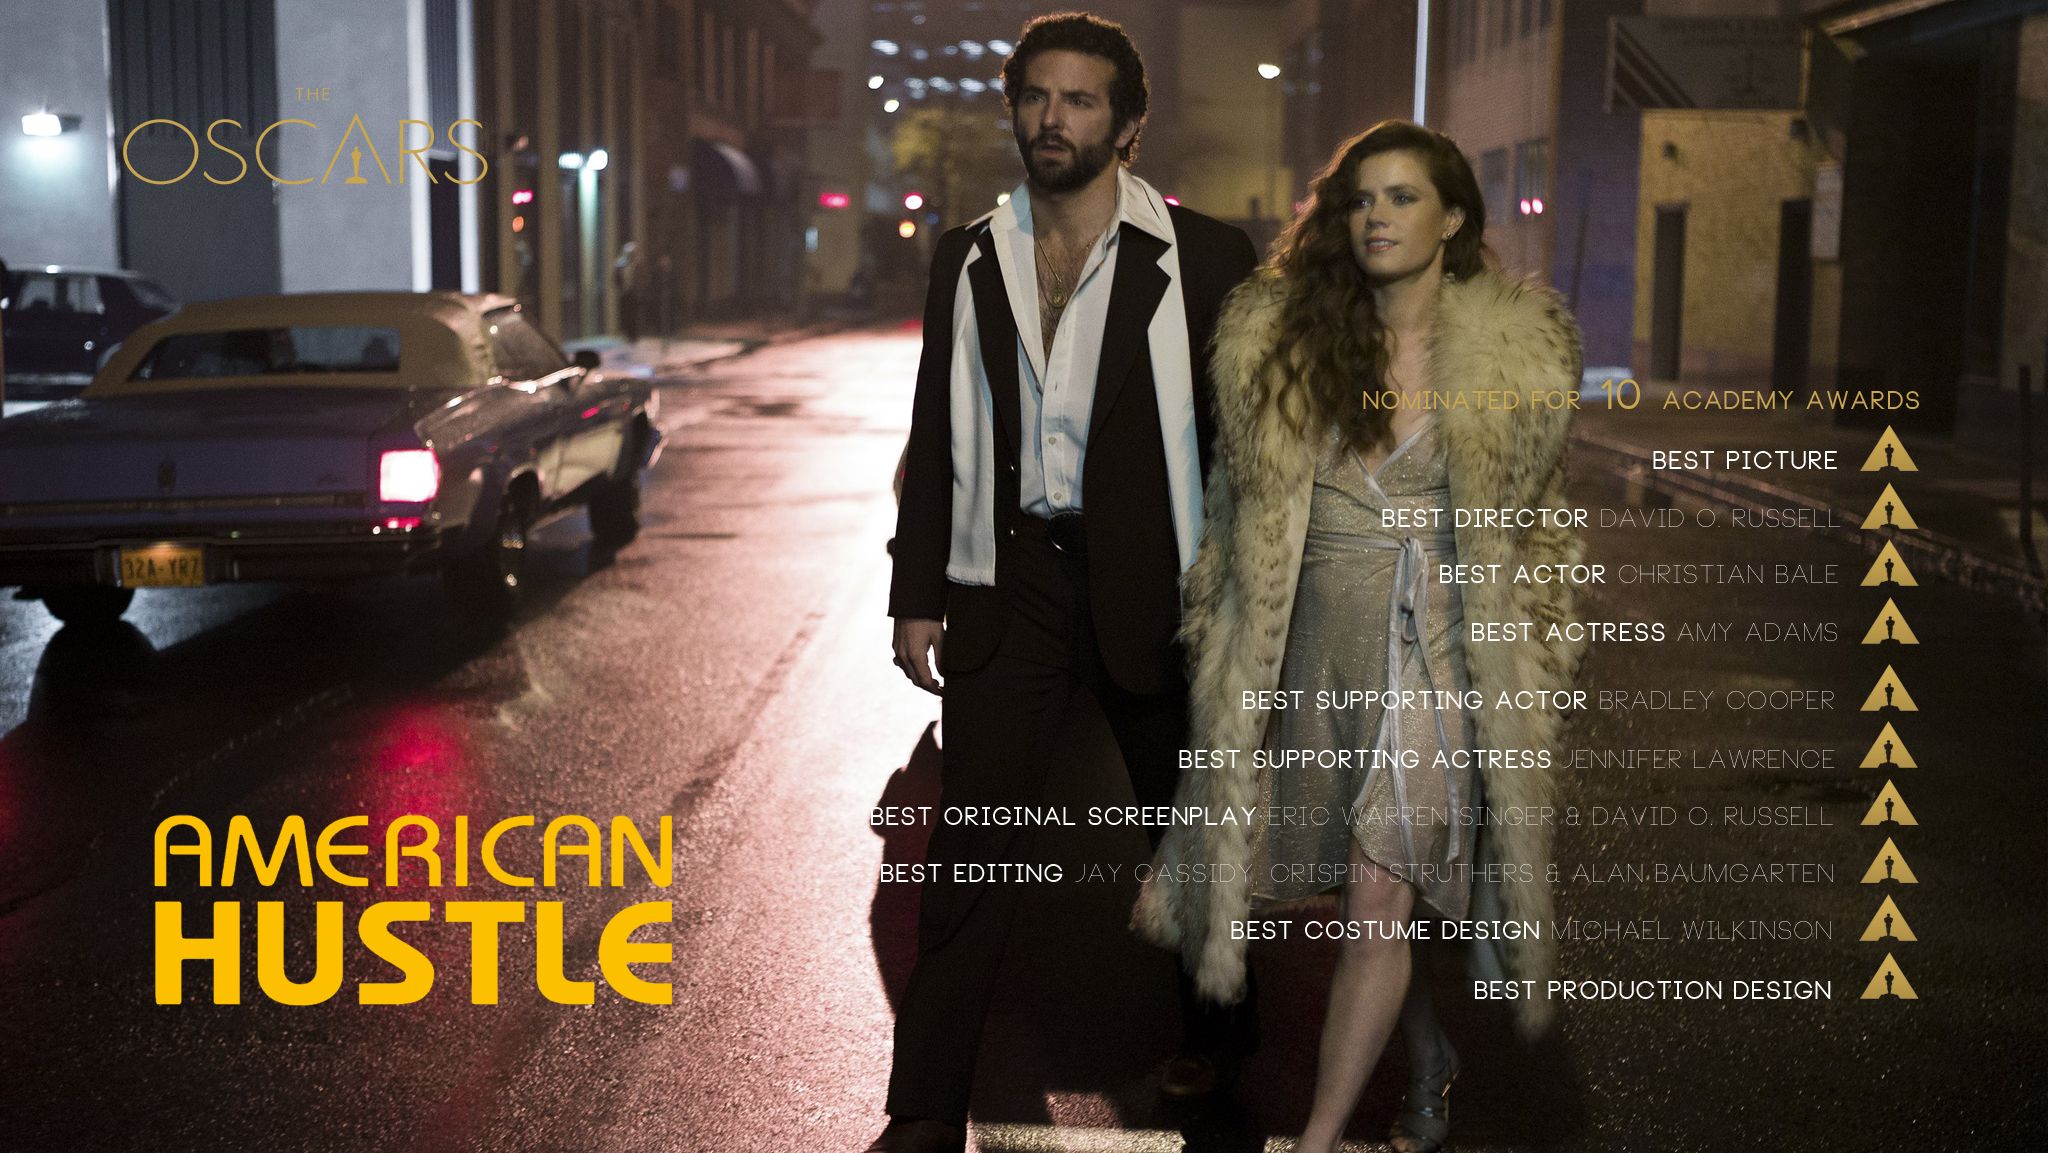 American Hustle nominated for 10 Academy Awards